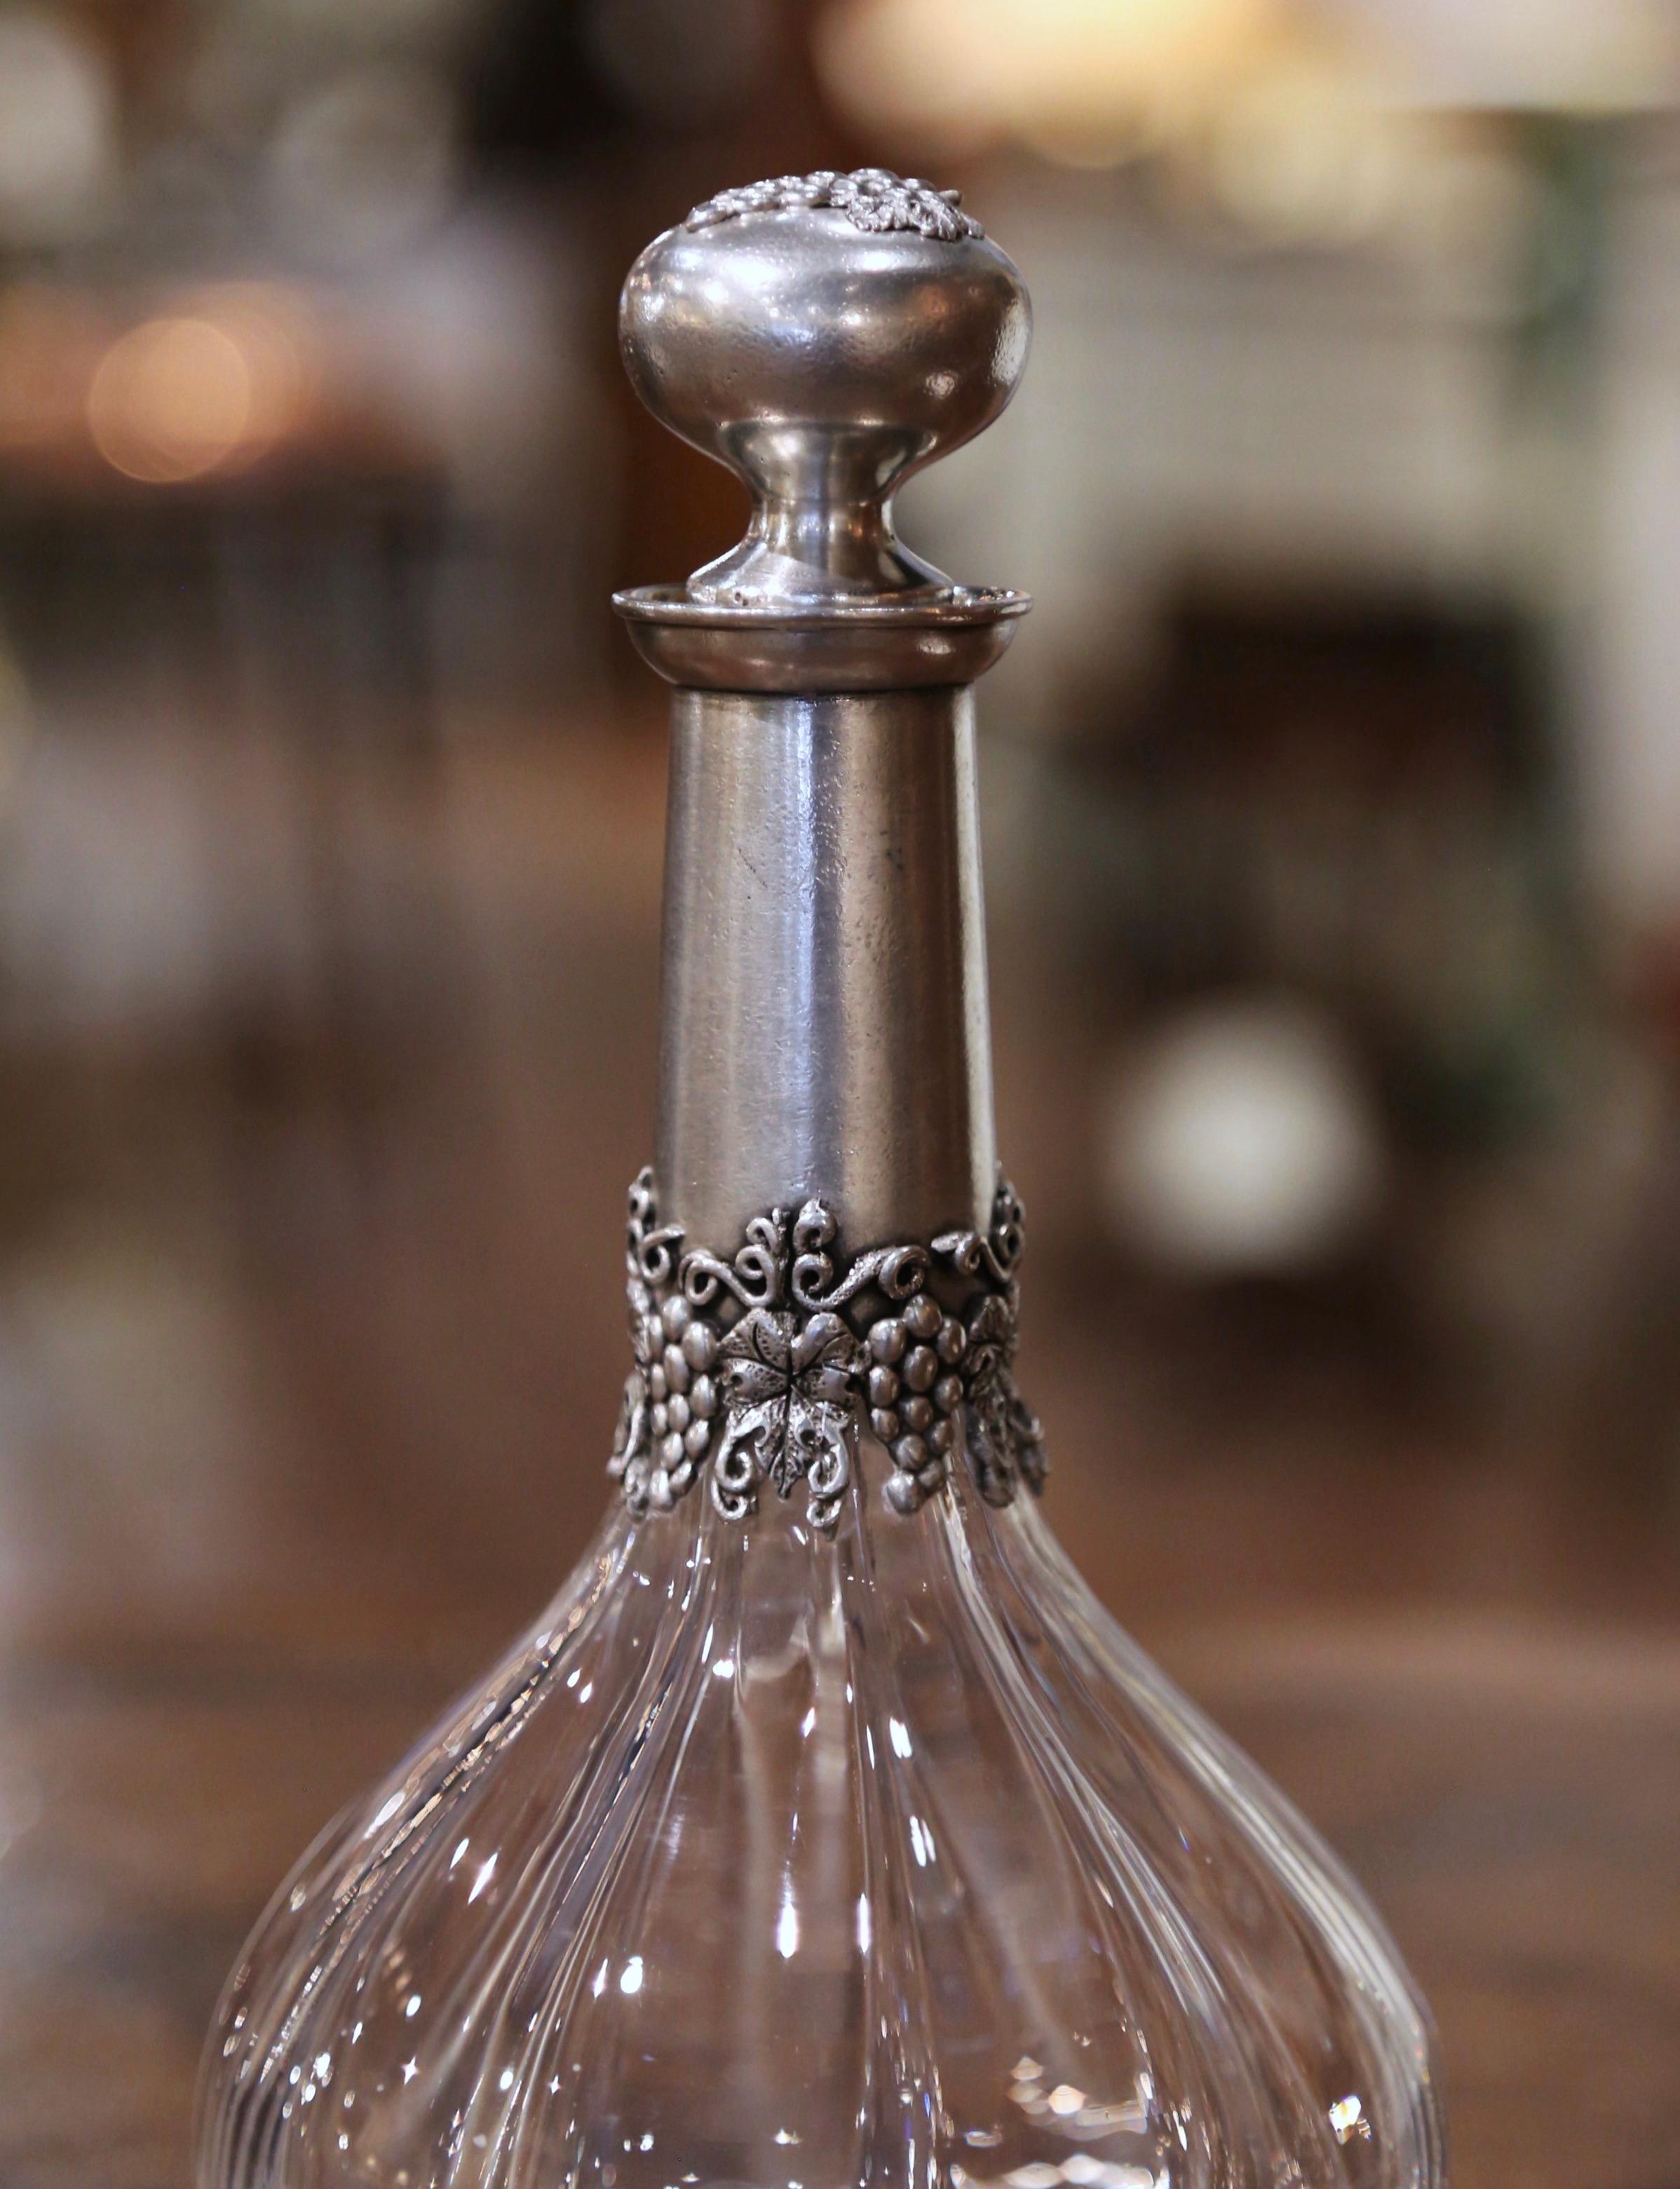 Serve your favorite Bordeaux or Cabernet sauvignon with style in this elegant antique decanter. Crafted in France circa 1960, the cut crystal carafe stands on a round pewter base decorated with grape and leaf motifs. The tall neck is dressed with